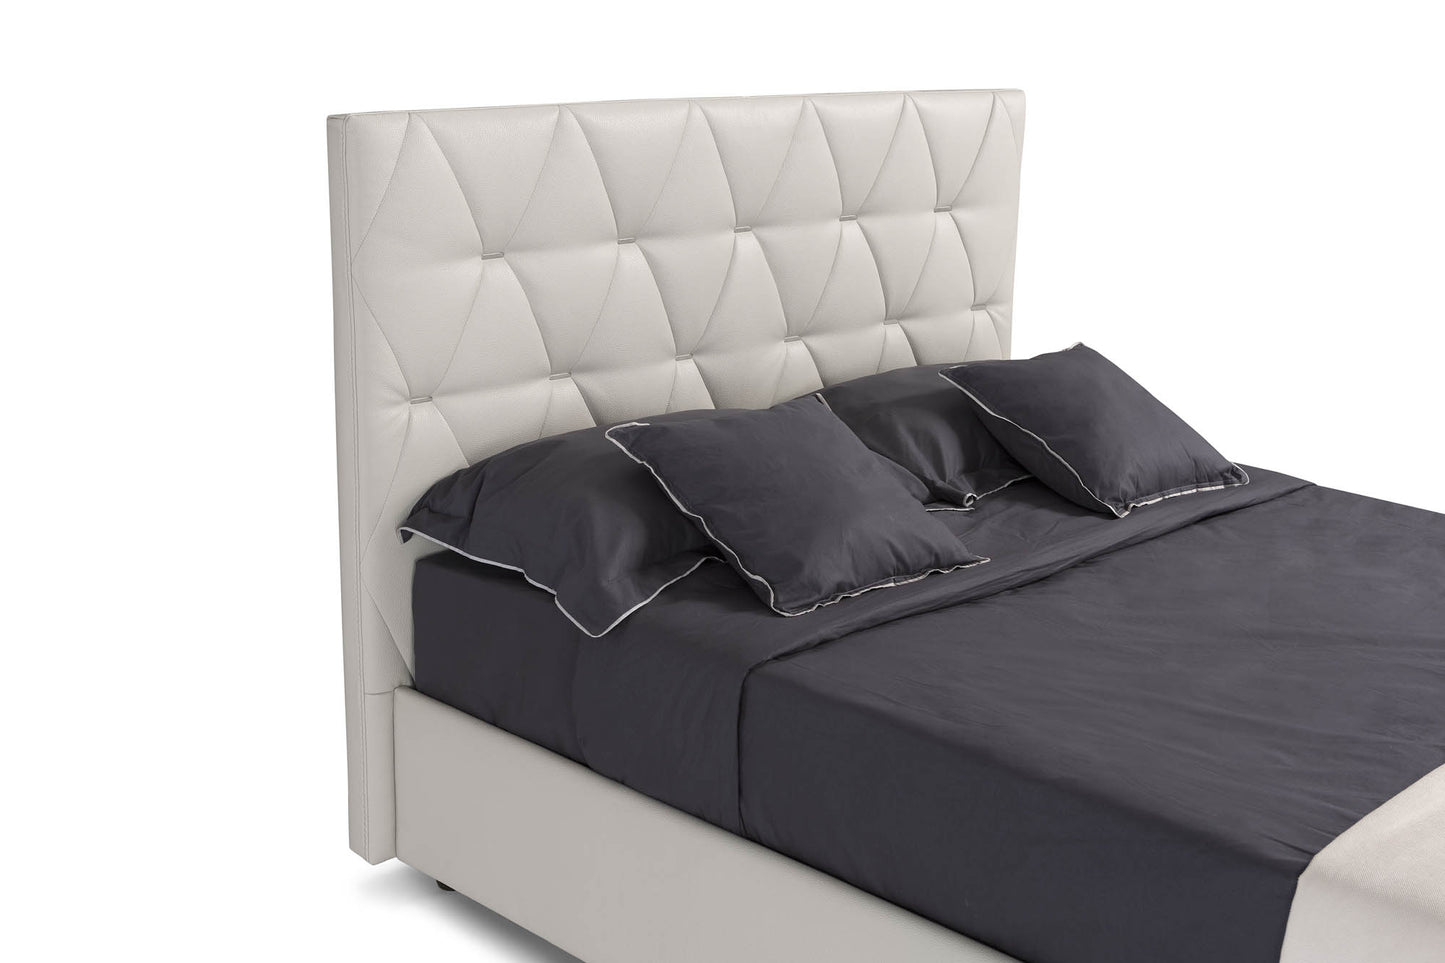 Novaluna - Lux Bed - Made in Italy - Eurohaus Modern Furniture LLC